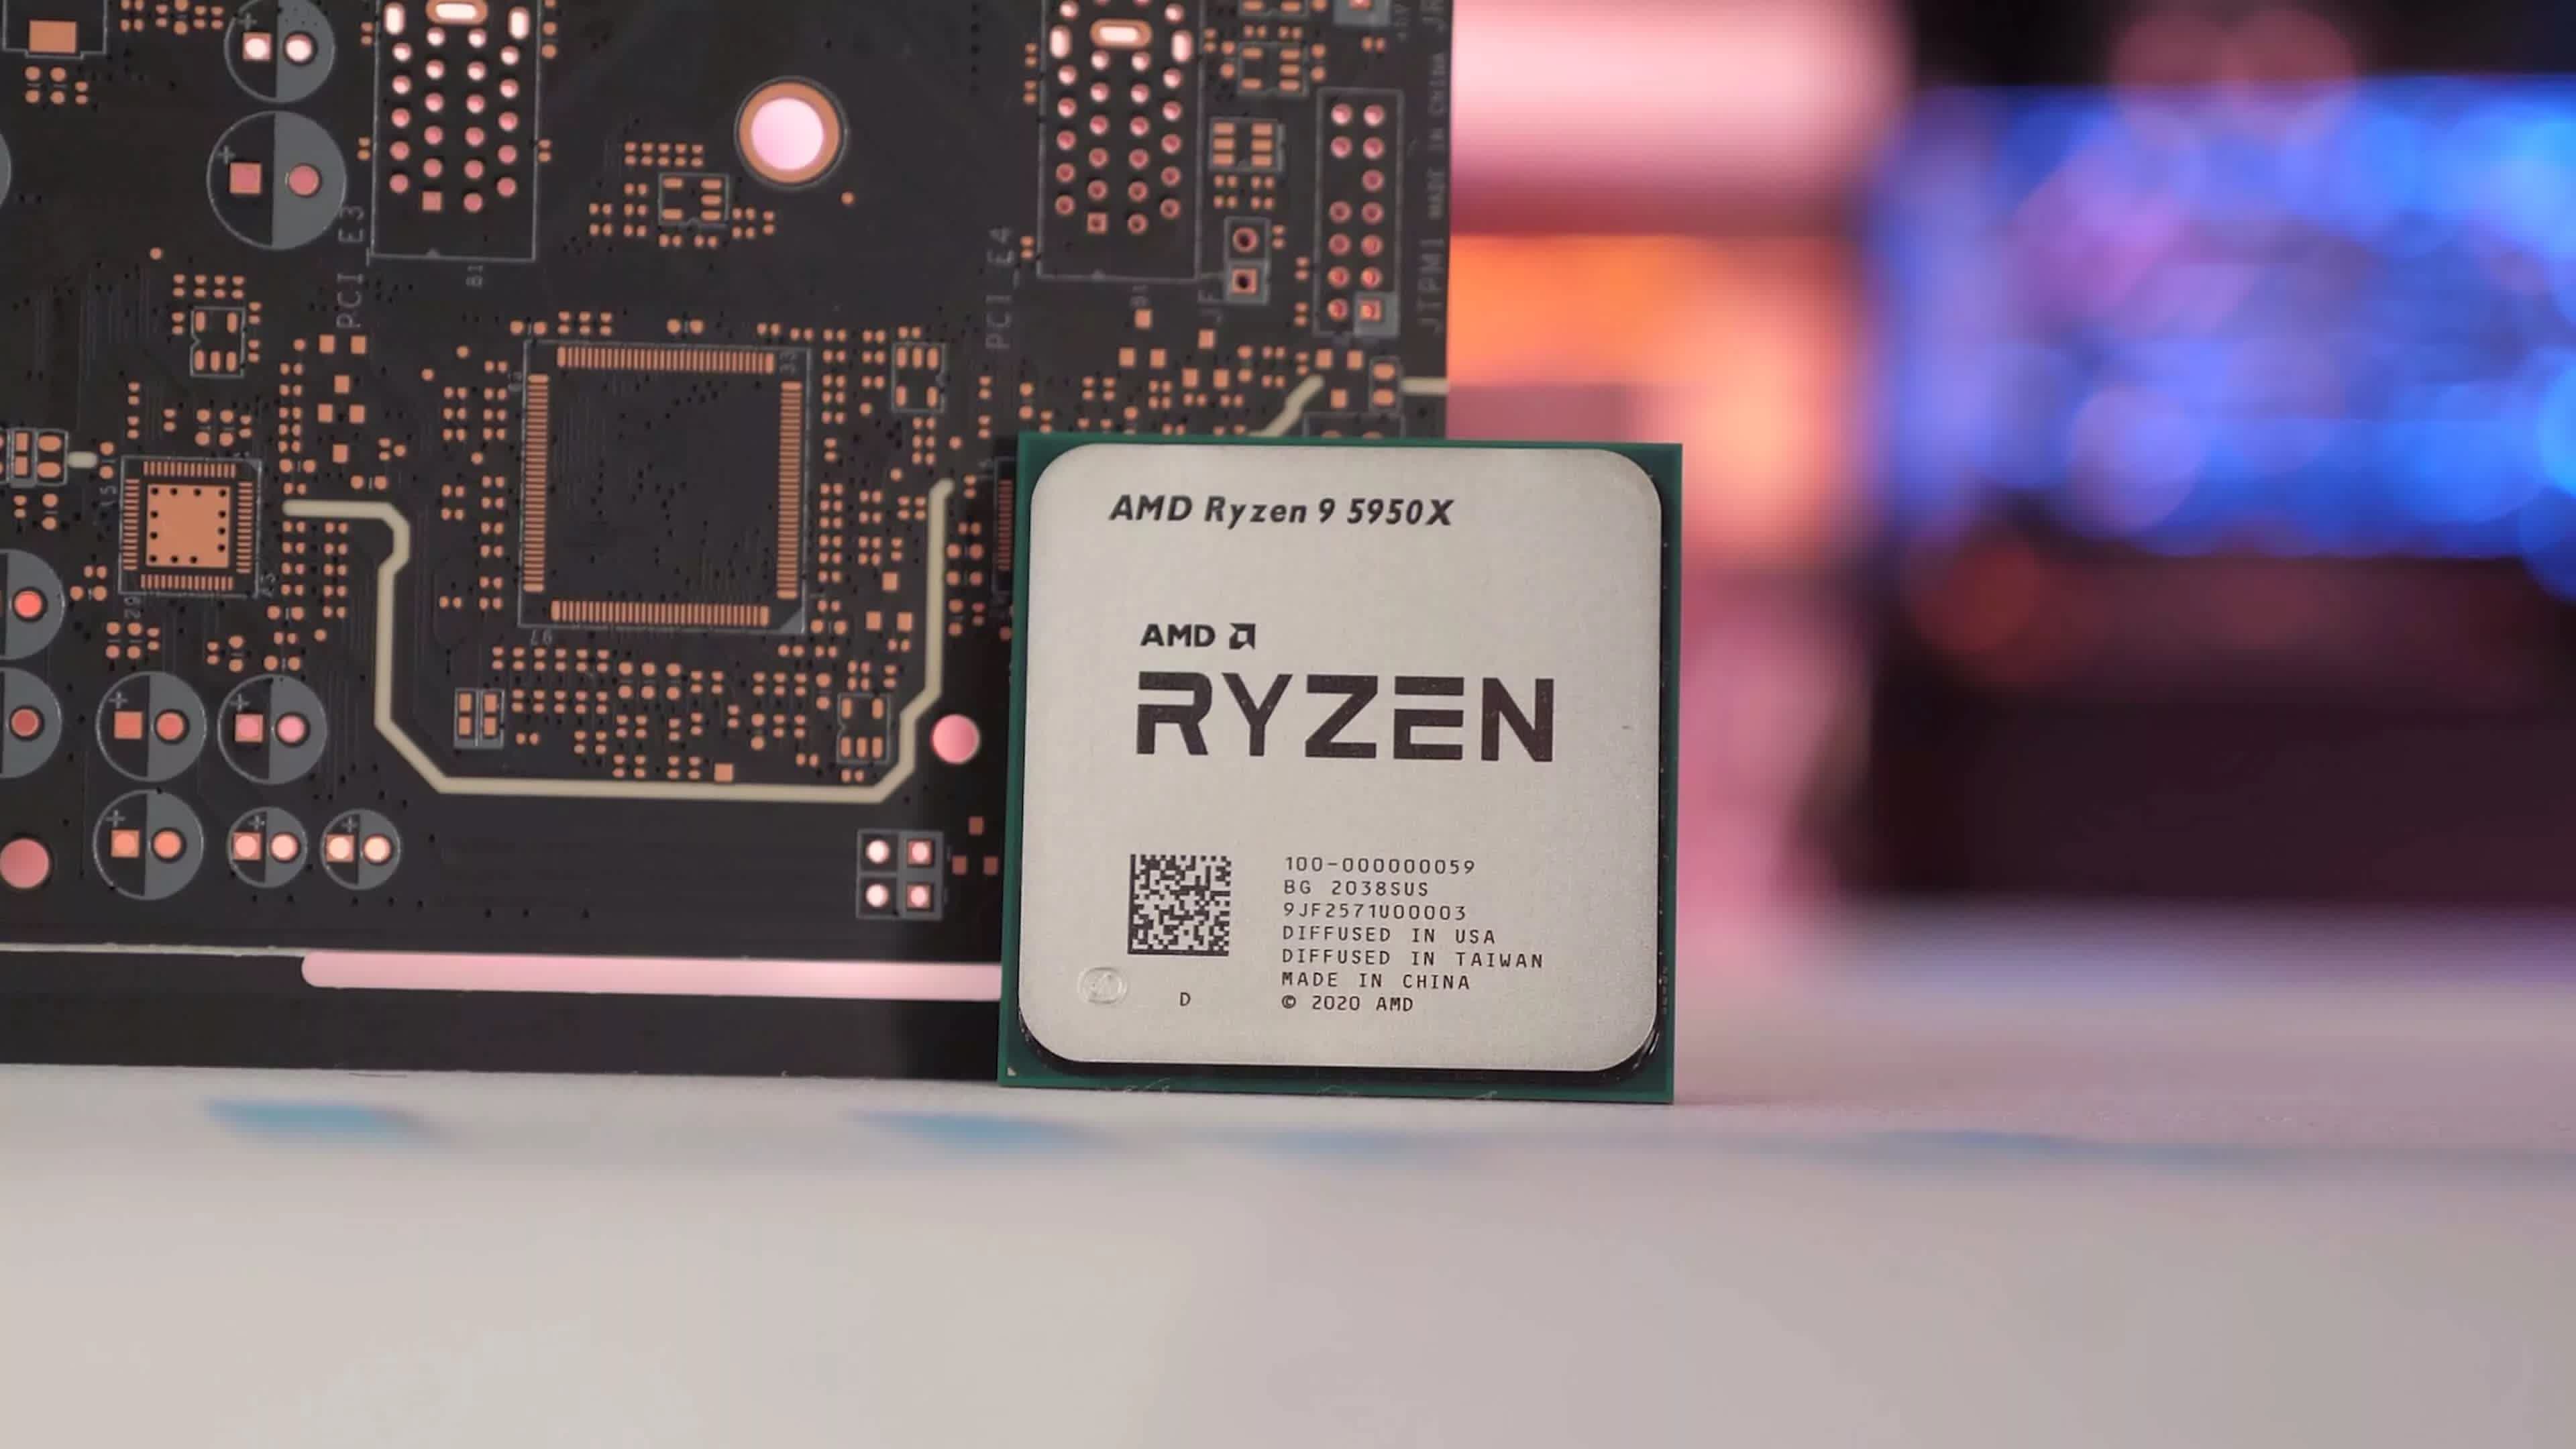 AMD promises to fix fTPM issue that causes stuttering and freezes in Windows 10 and Windows 11 for Ryzen users